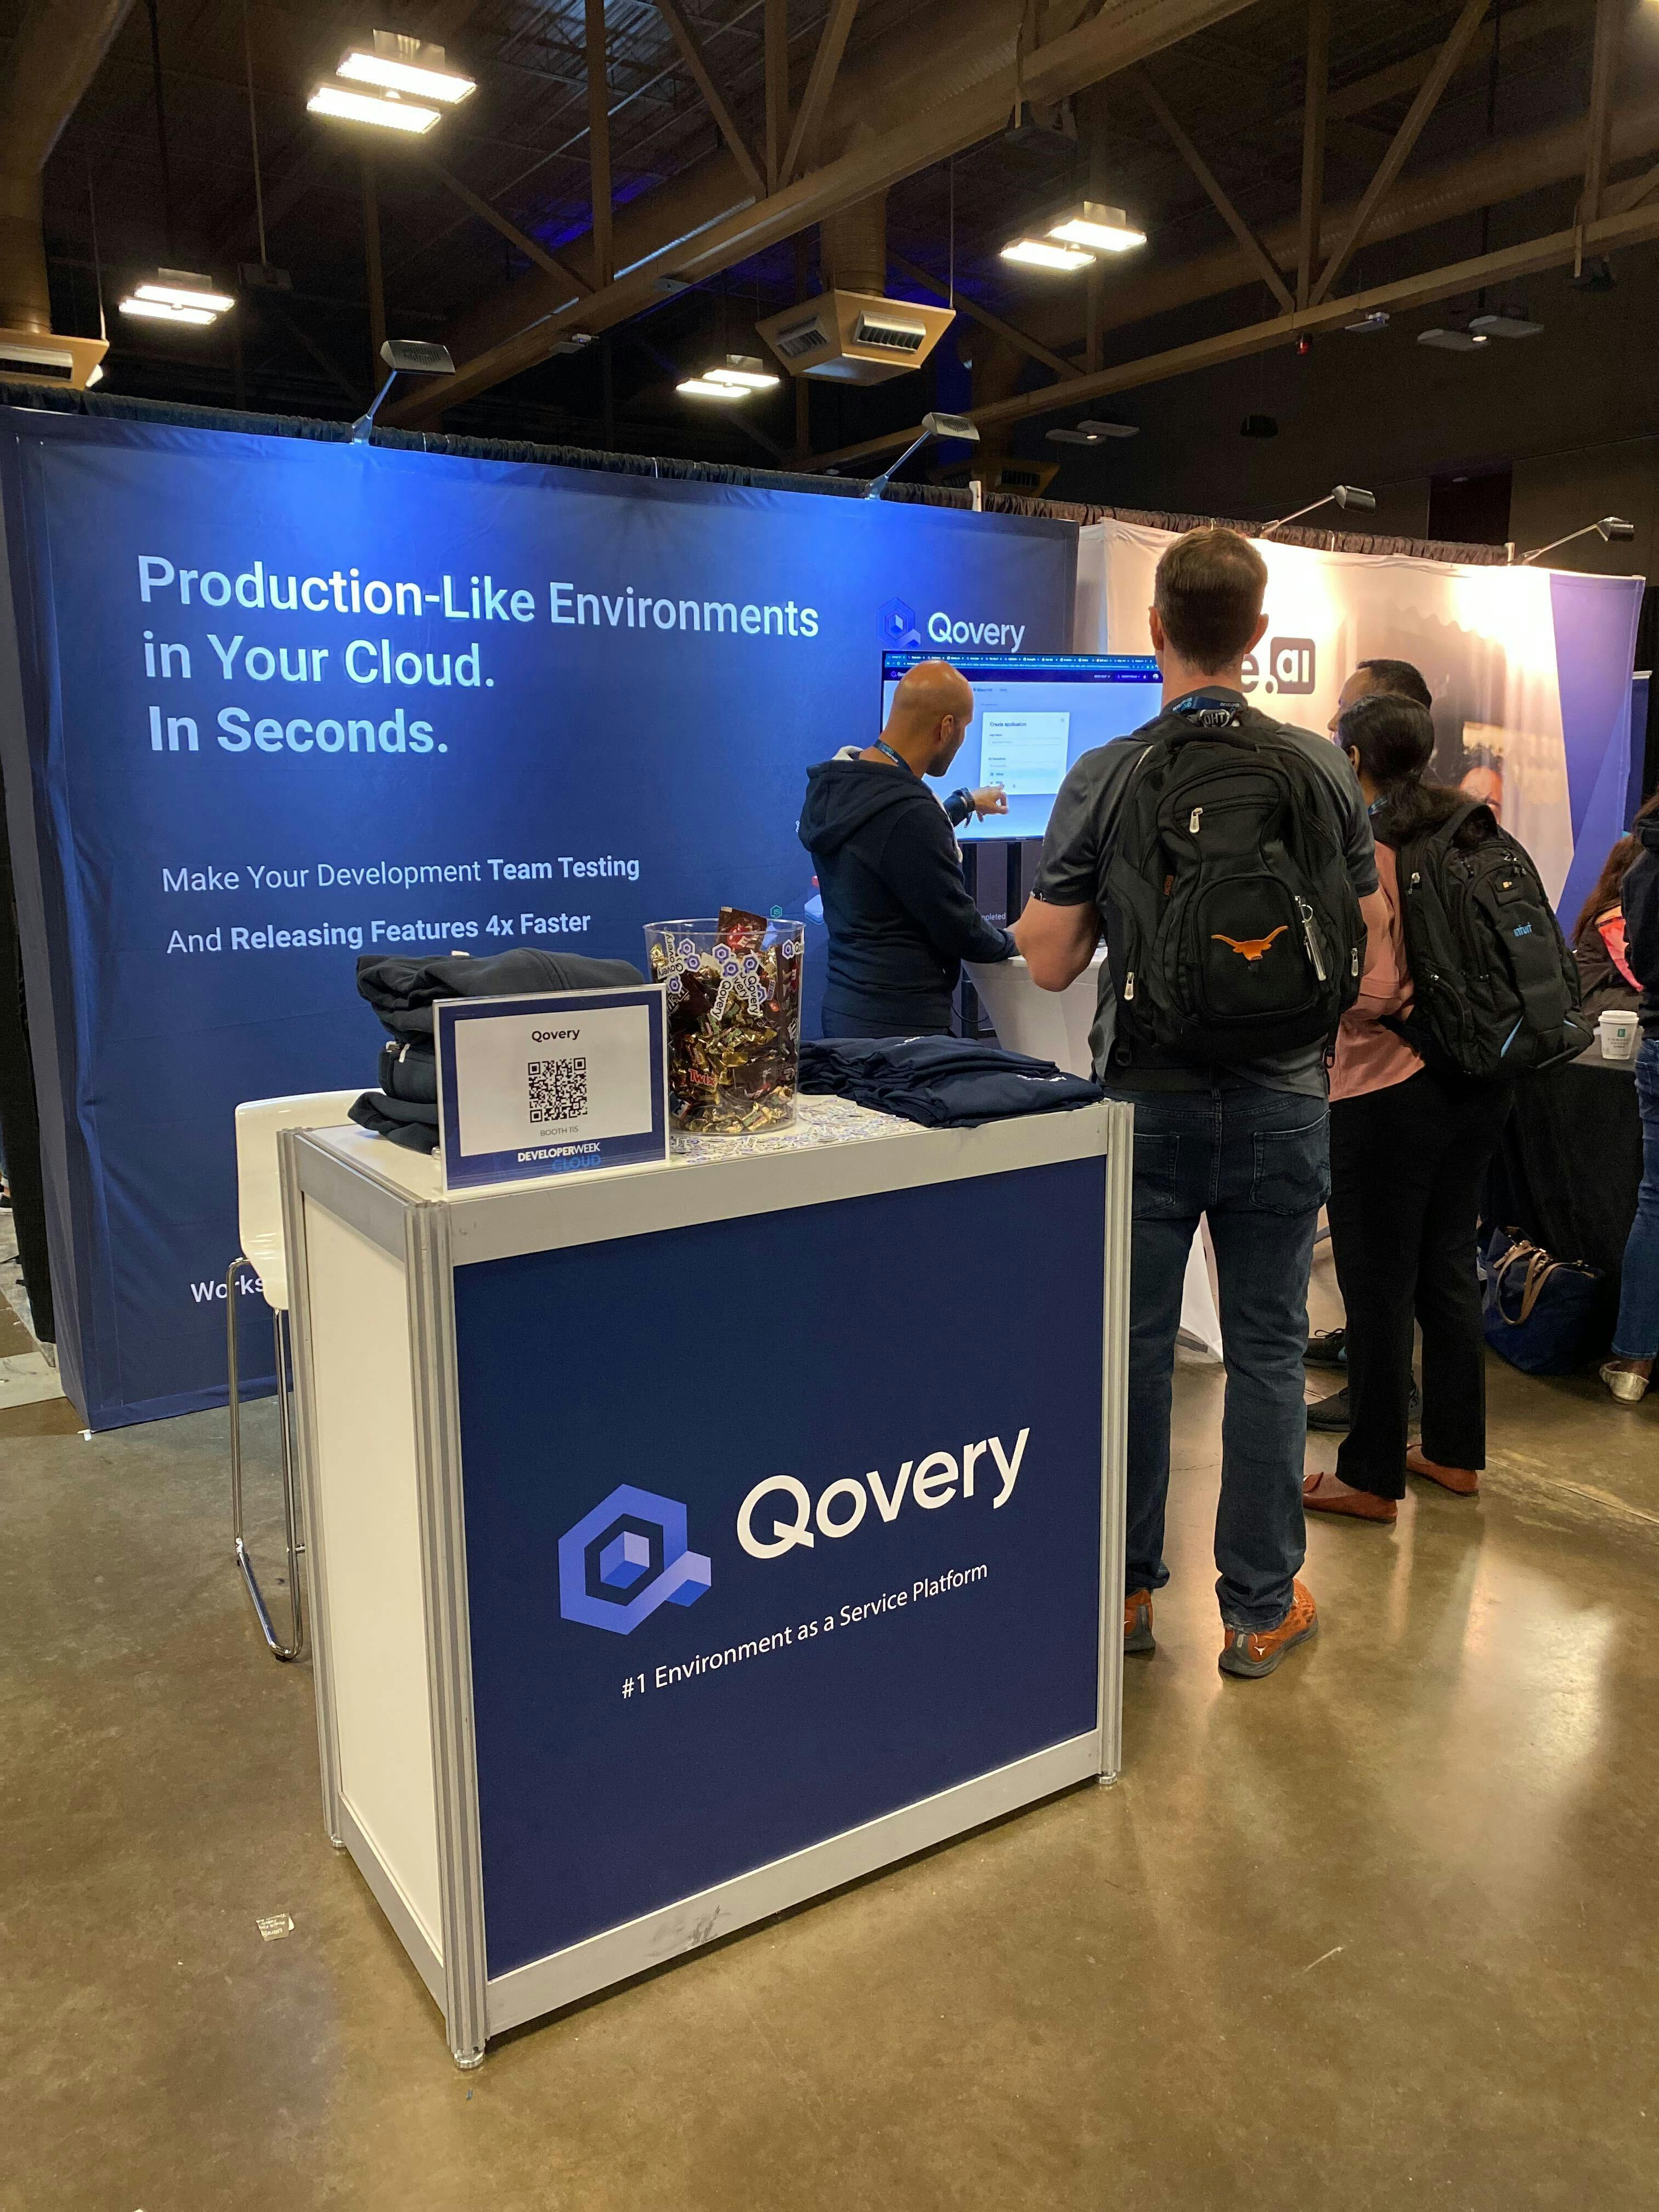 The Qovery booth at the Developer Week Cloud, Austin 